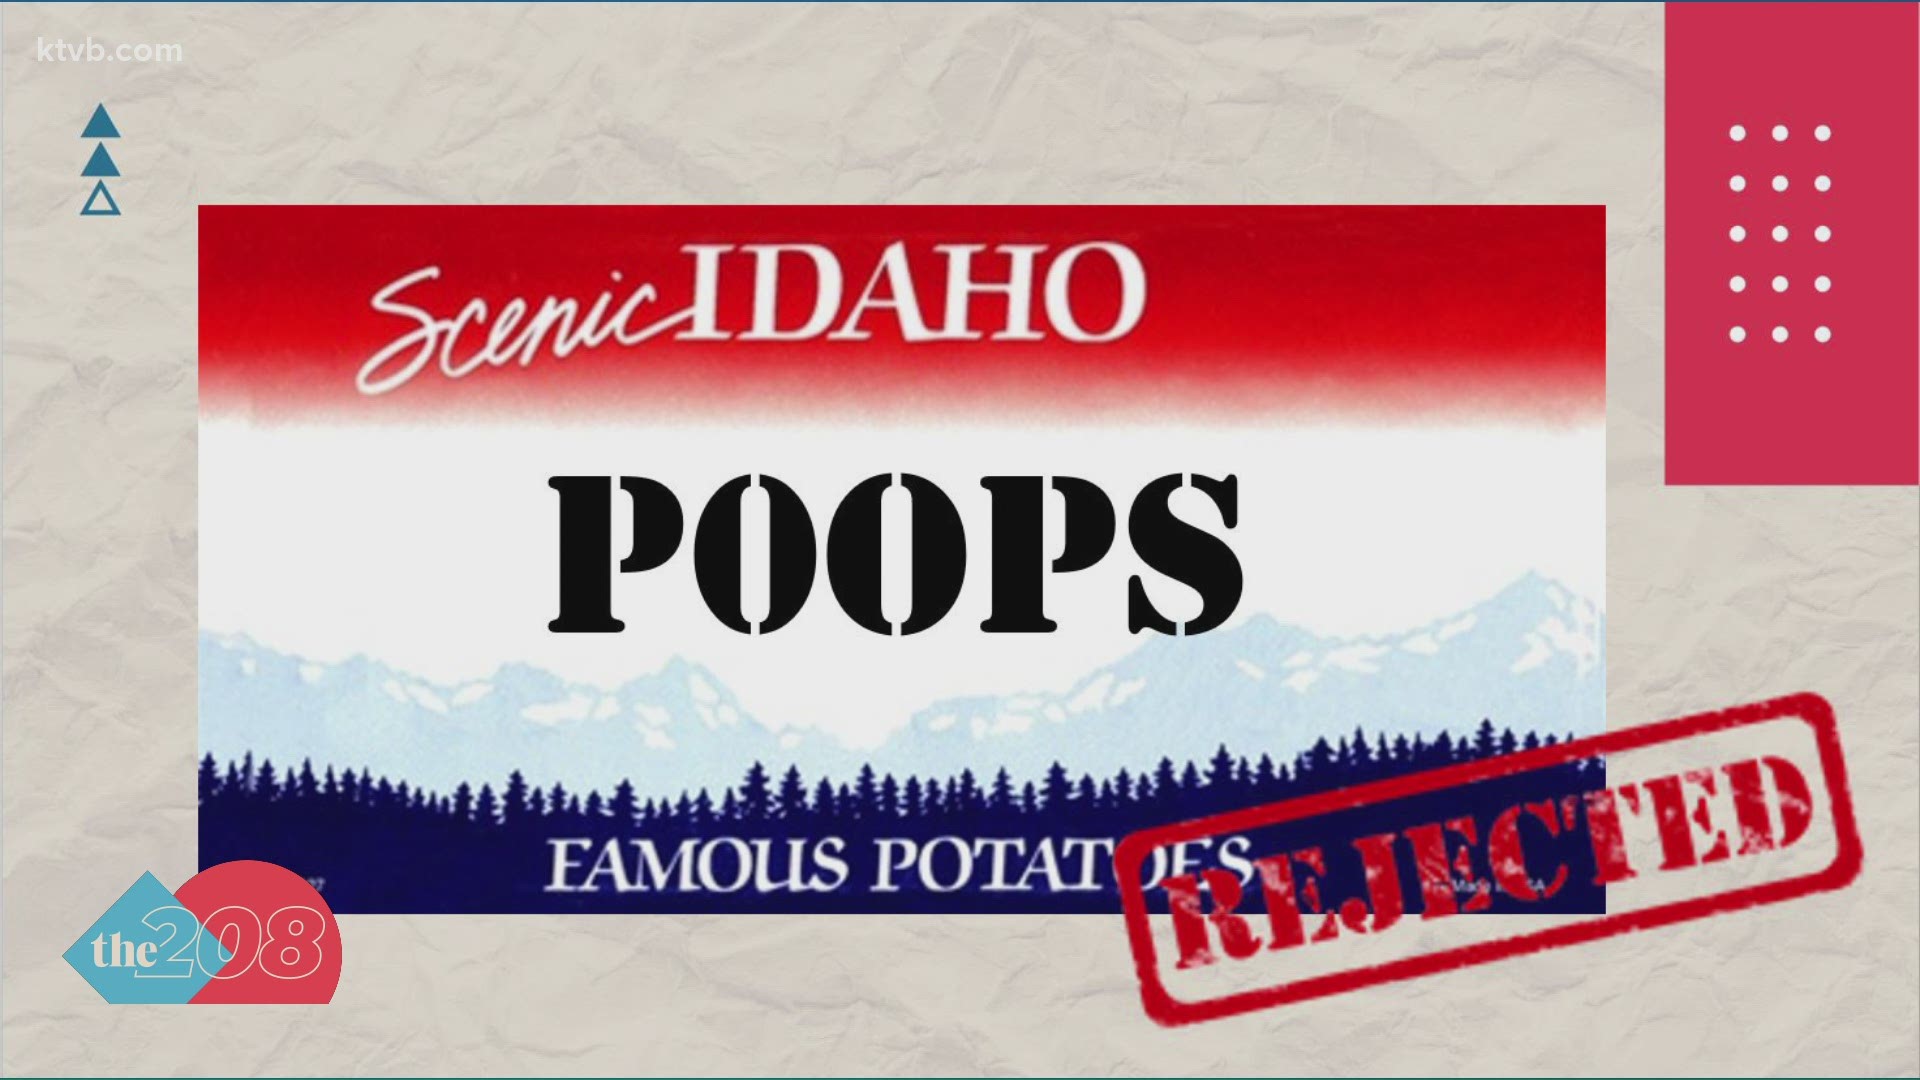 hater-p00ps-idaho-s-2020-rejected-personalized-license-plates-ktvb